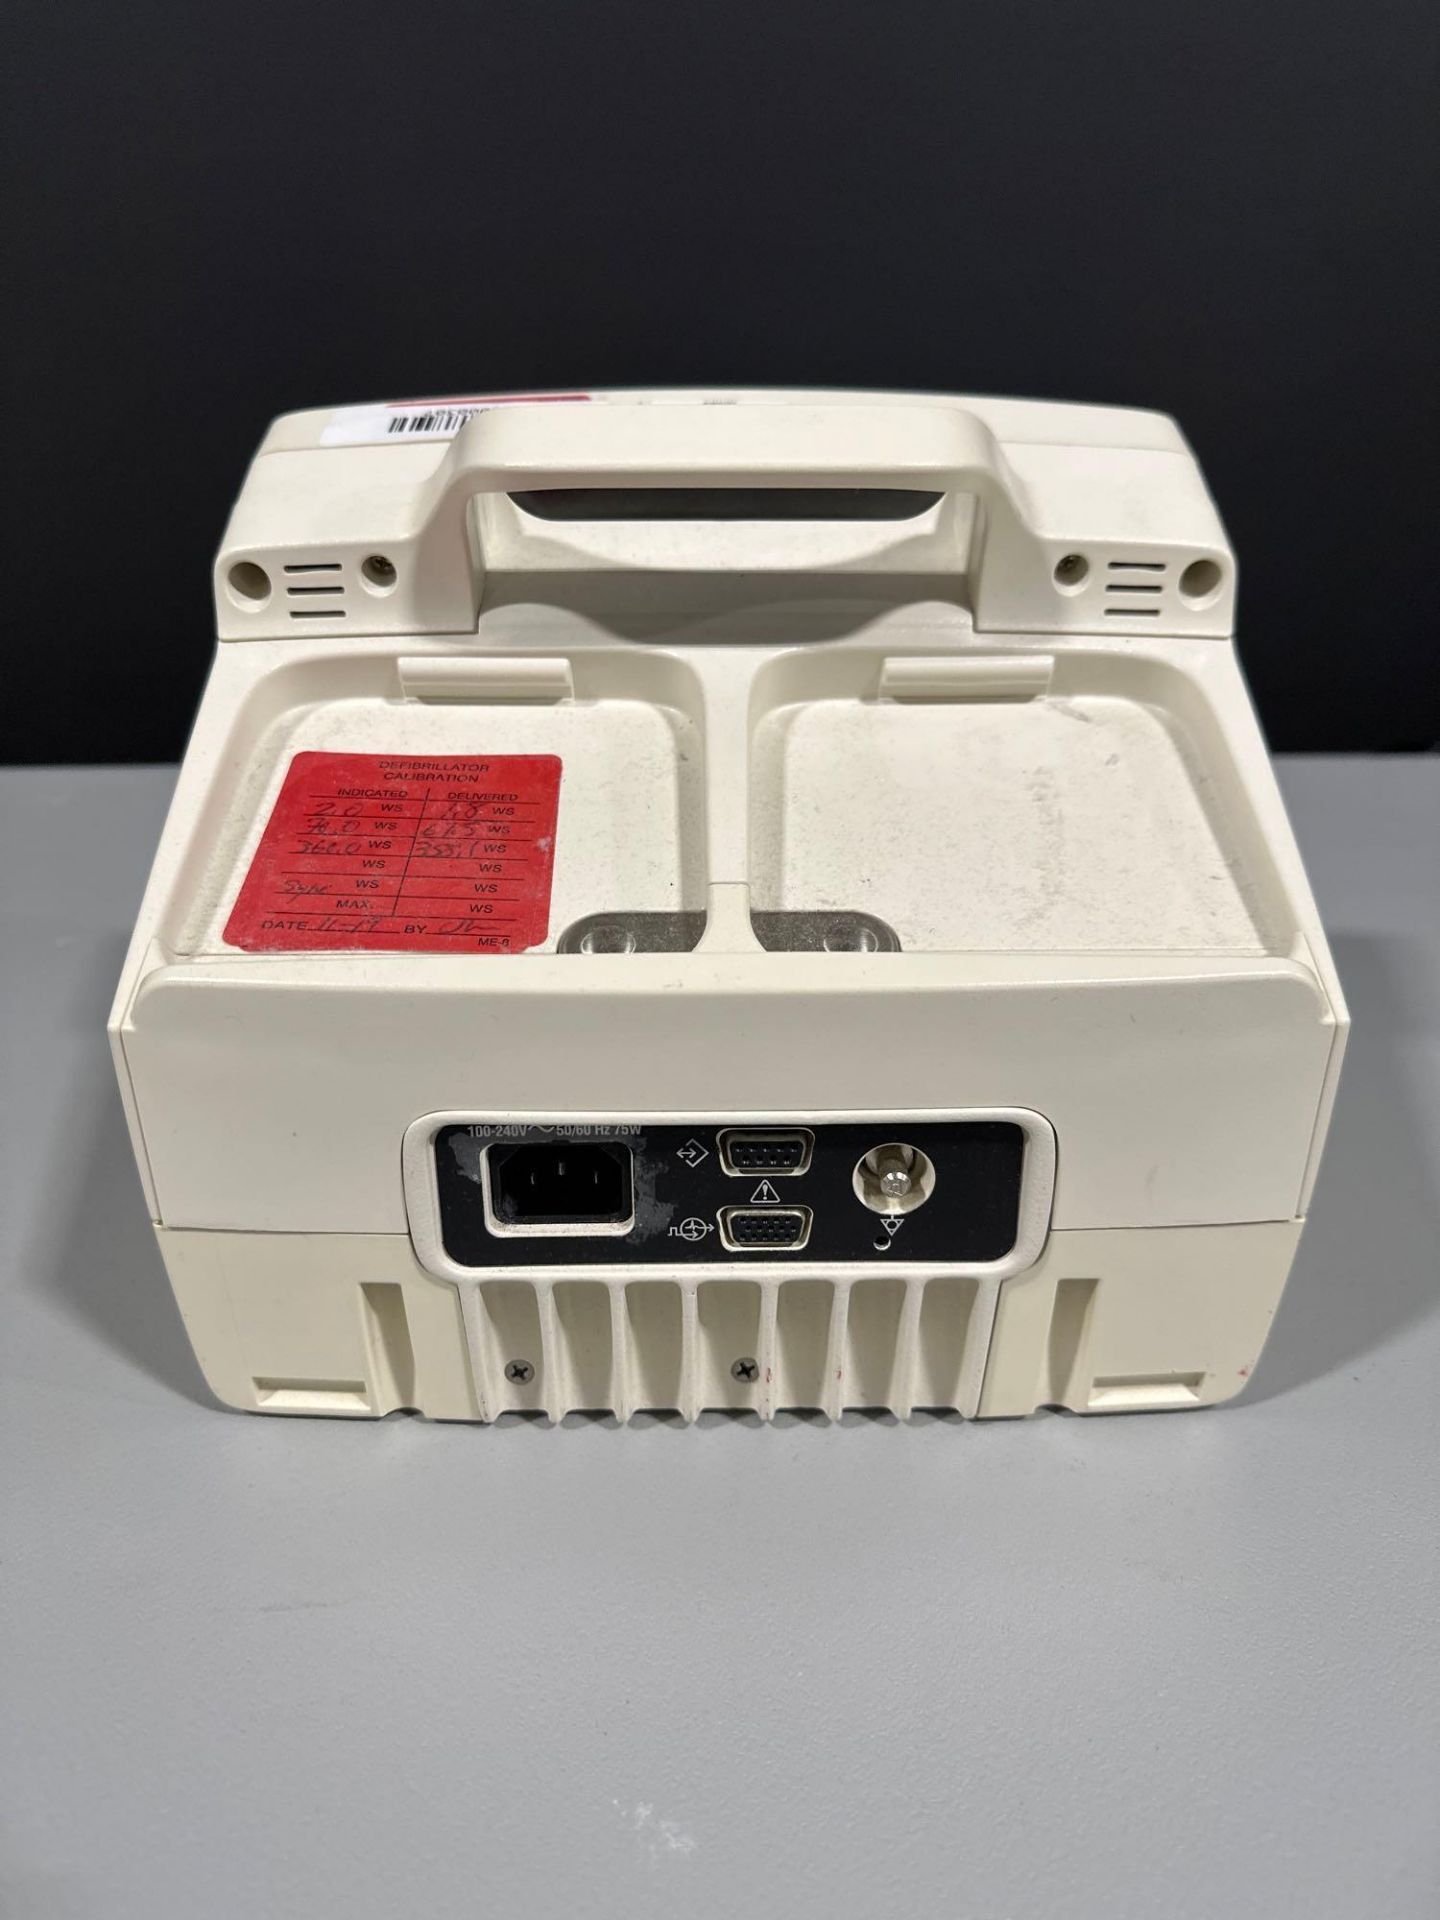 MEDTRONIC/PHYSIO CONTROL LIFEPAK 20 DEFIB WITH PACING, 3 LEAD ECG, ANALYZE (AED MODE) - Image 8 of 8